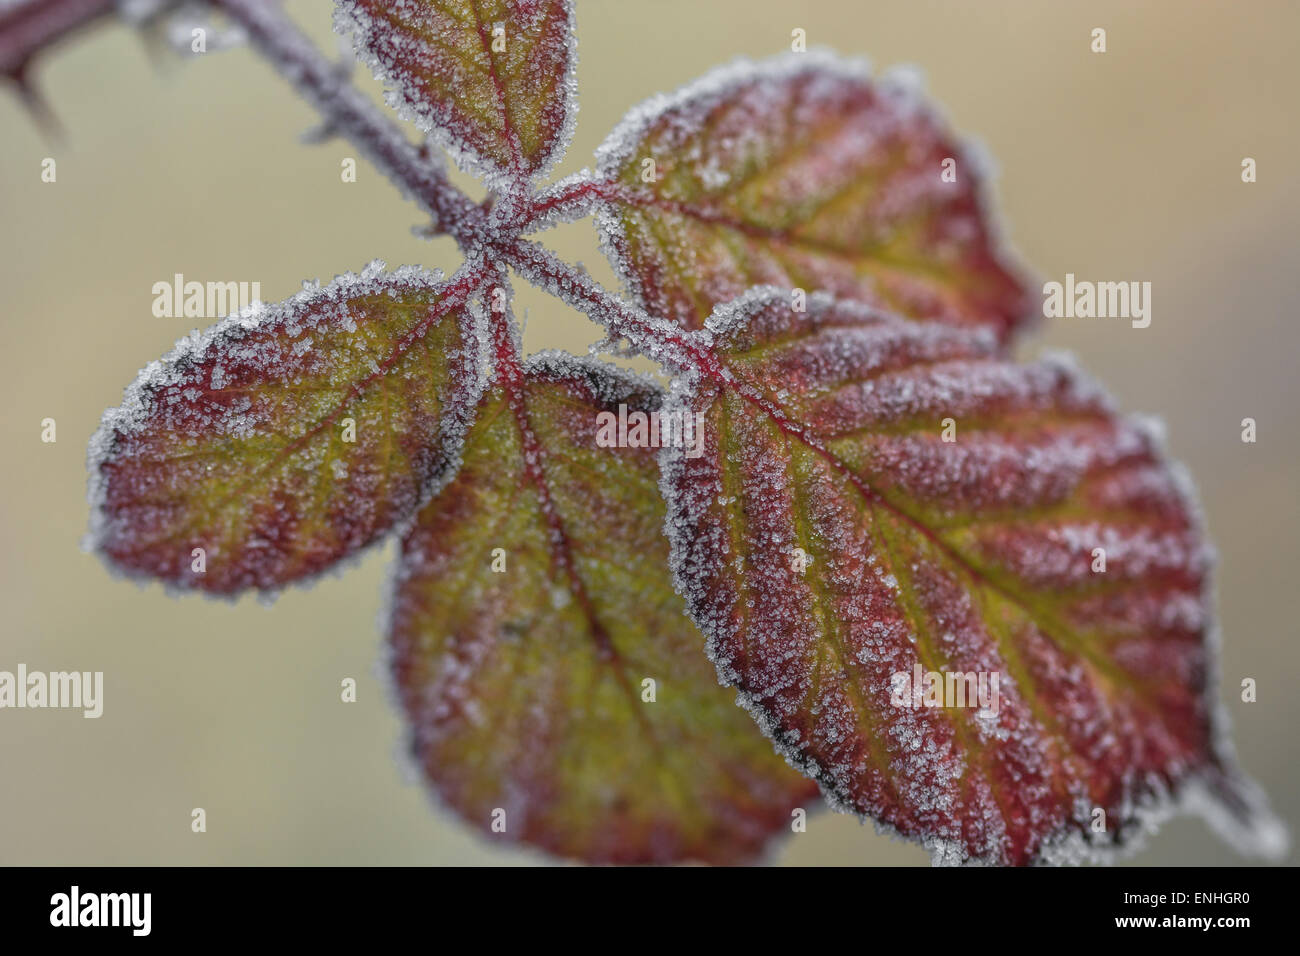 Frost / Ice crystals on bramble leaves. Frosty relations concept, frosty leaves, frost covered leaves. Stock Photo